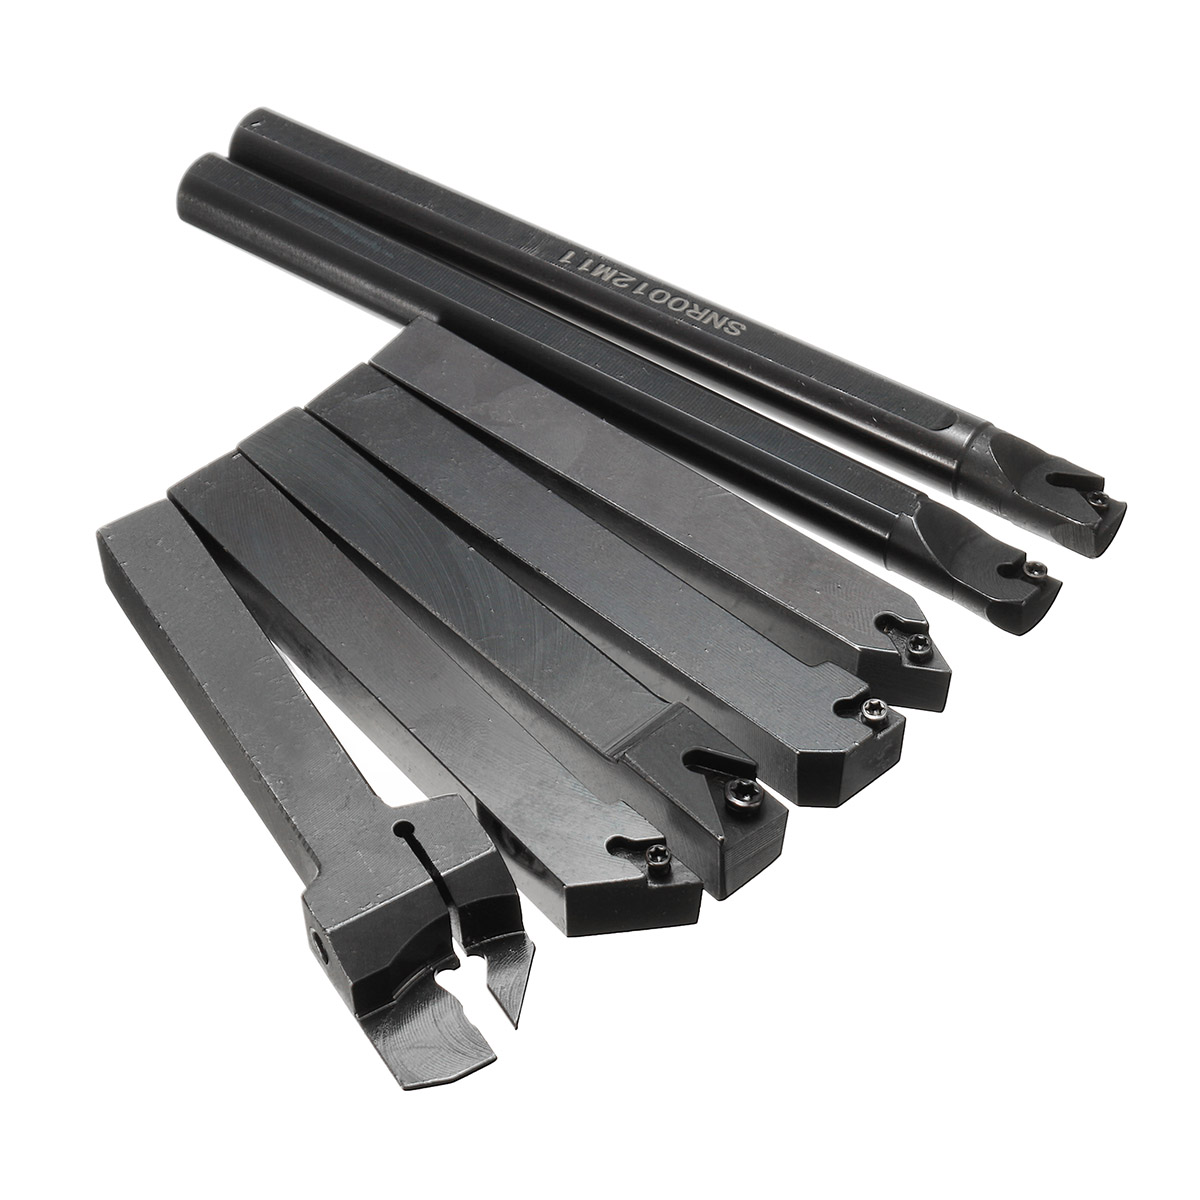 Drillpro-7pcs-12mm-Shank-Lathe-Set-Boring-Bar-Turning-Tool-Holder-with-Carbide-Inserts-CCMT060204-DC-1150453-4